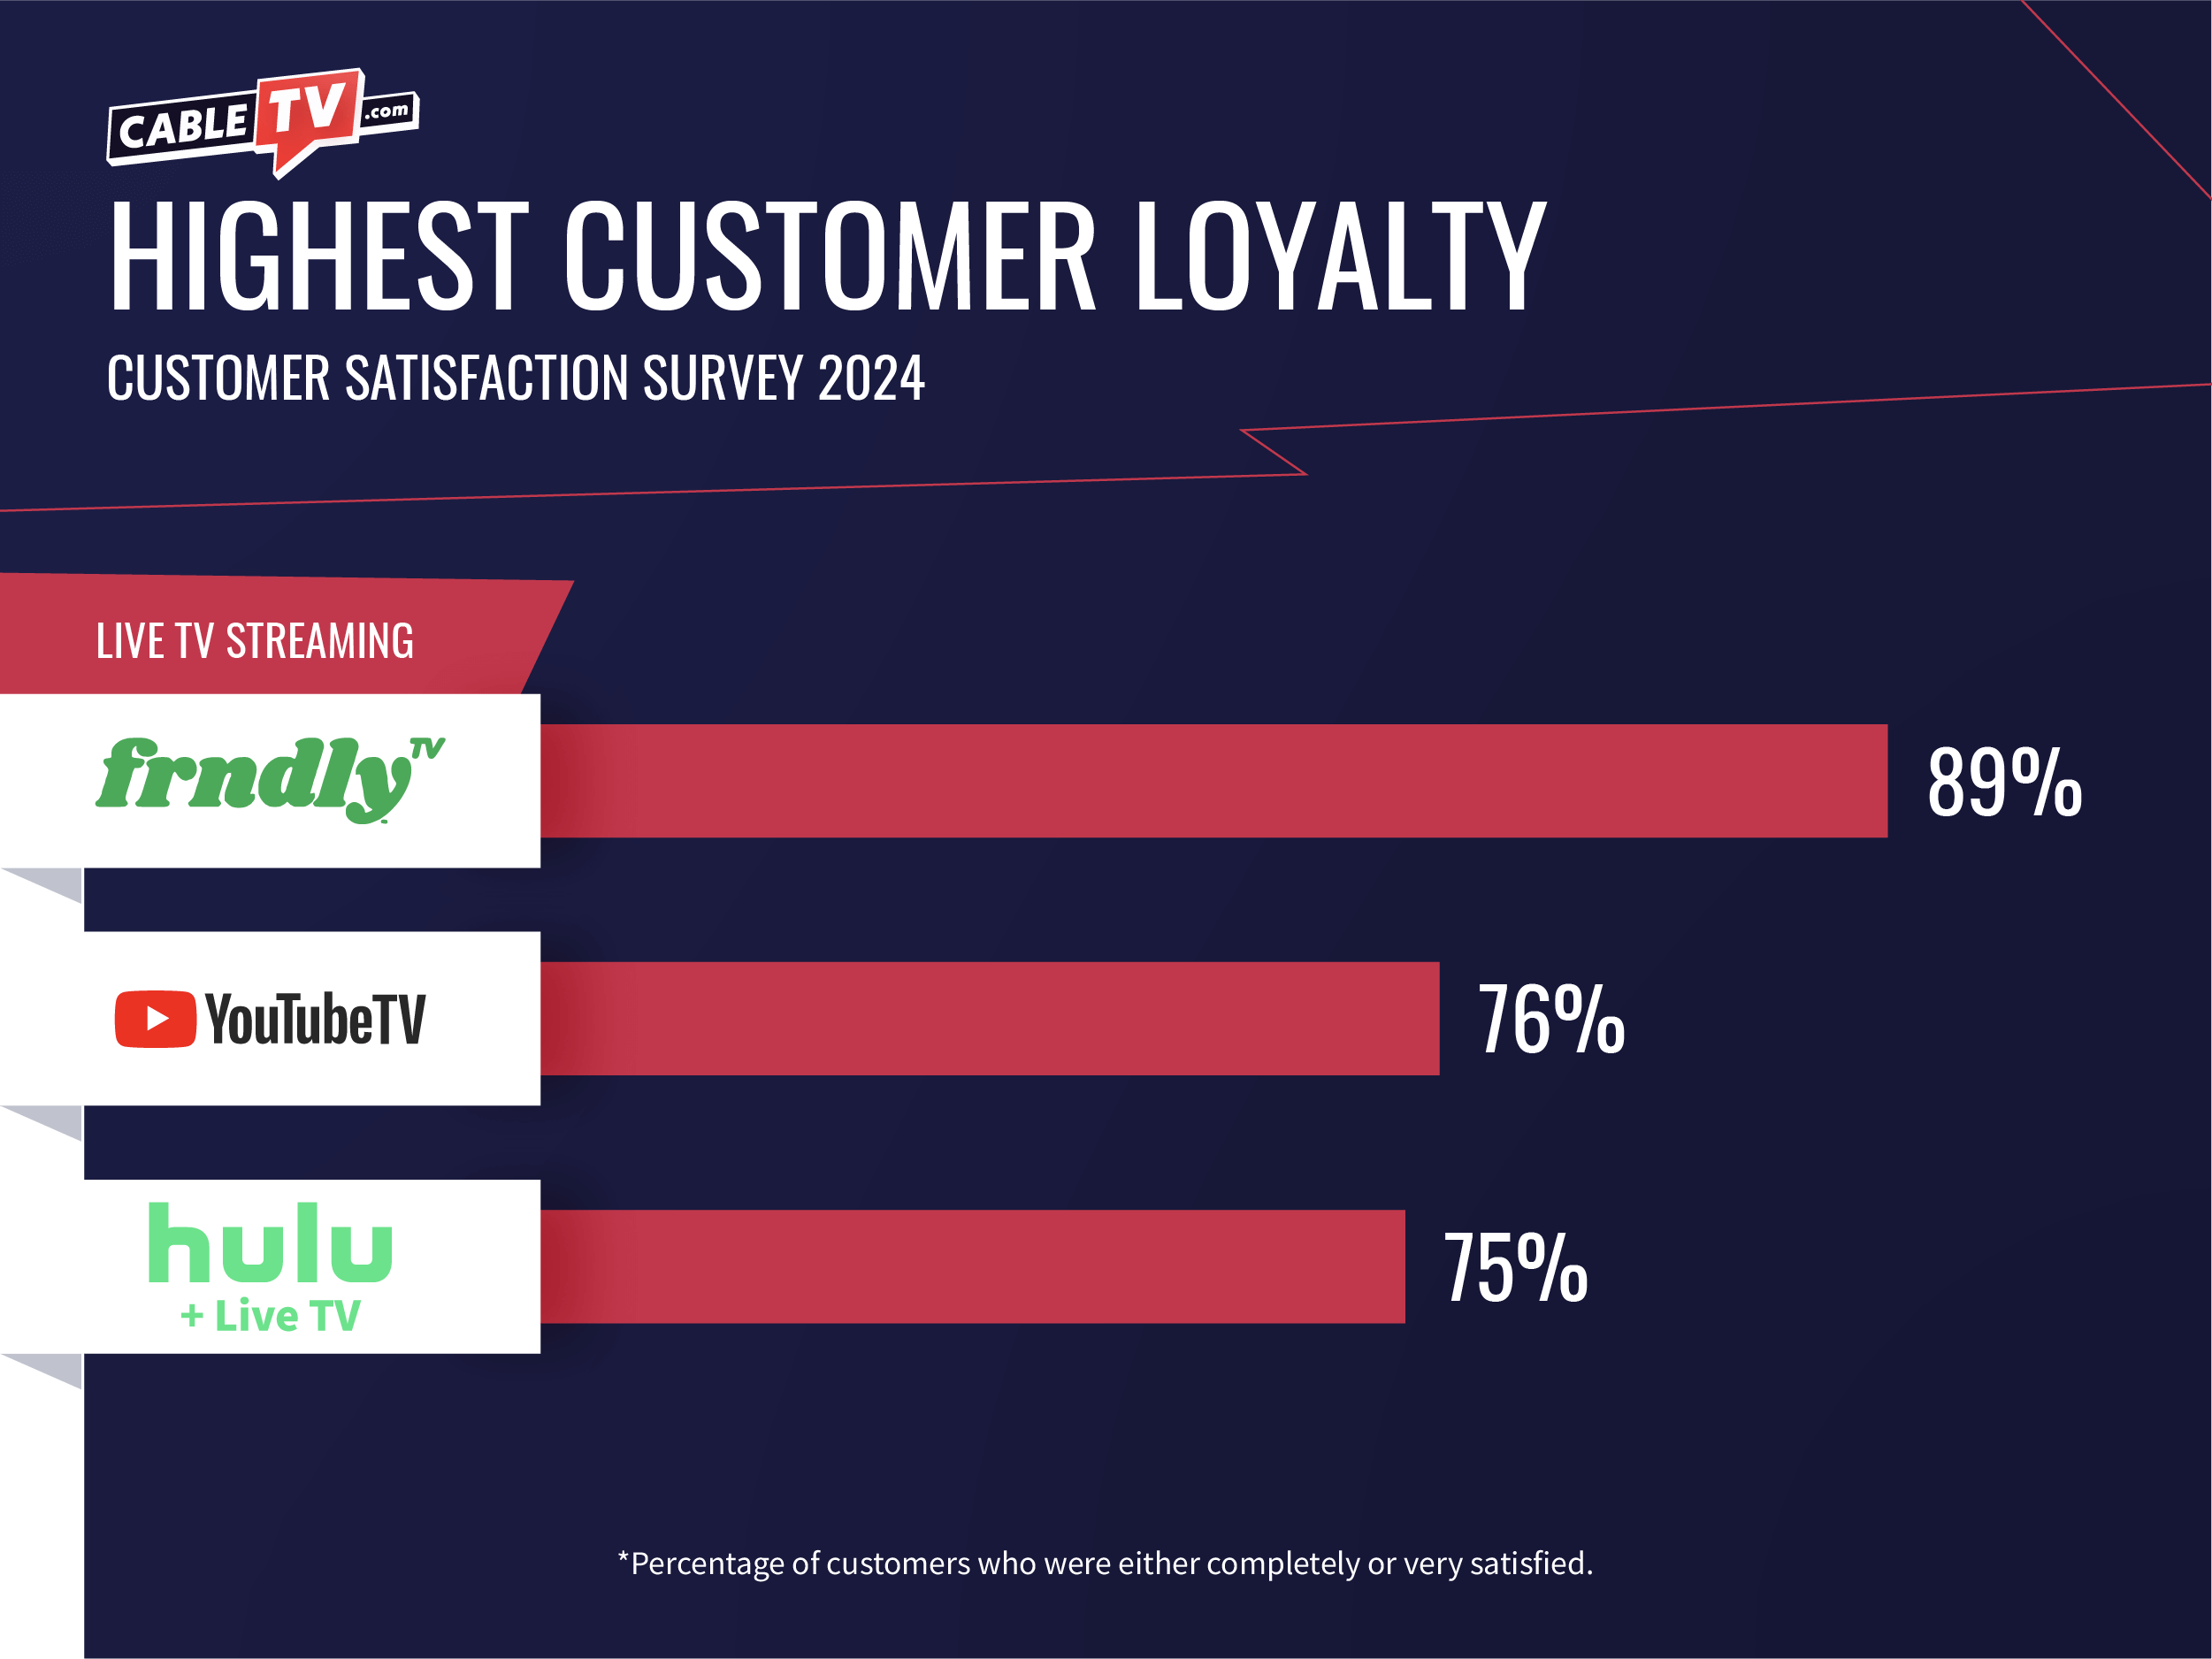 Customers are more likely to recommend Frndly TV, YouTube TV, and Hulu + Live TV